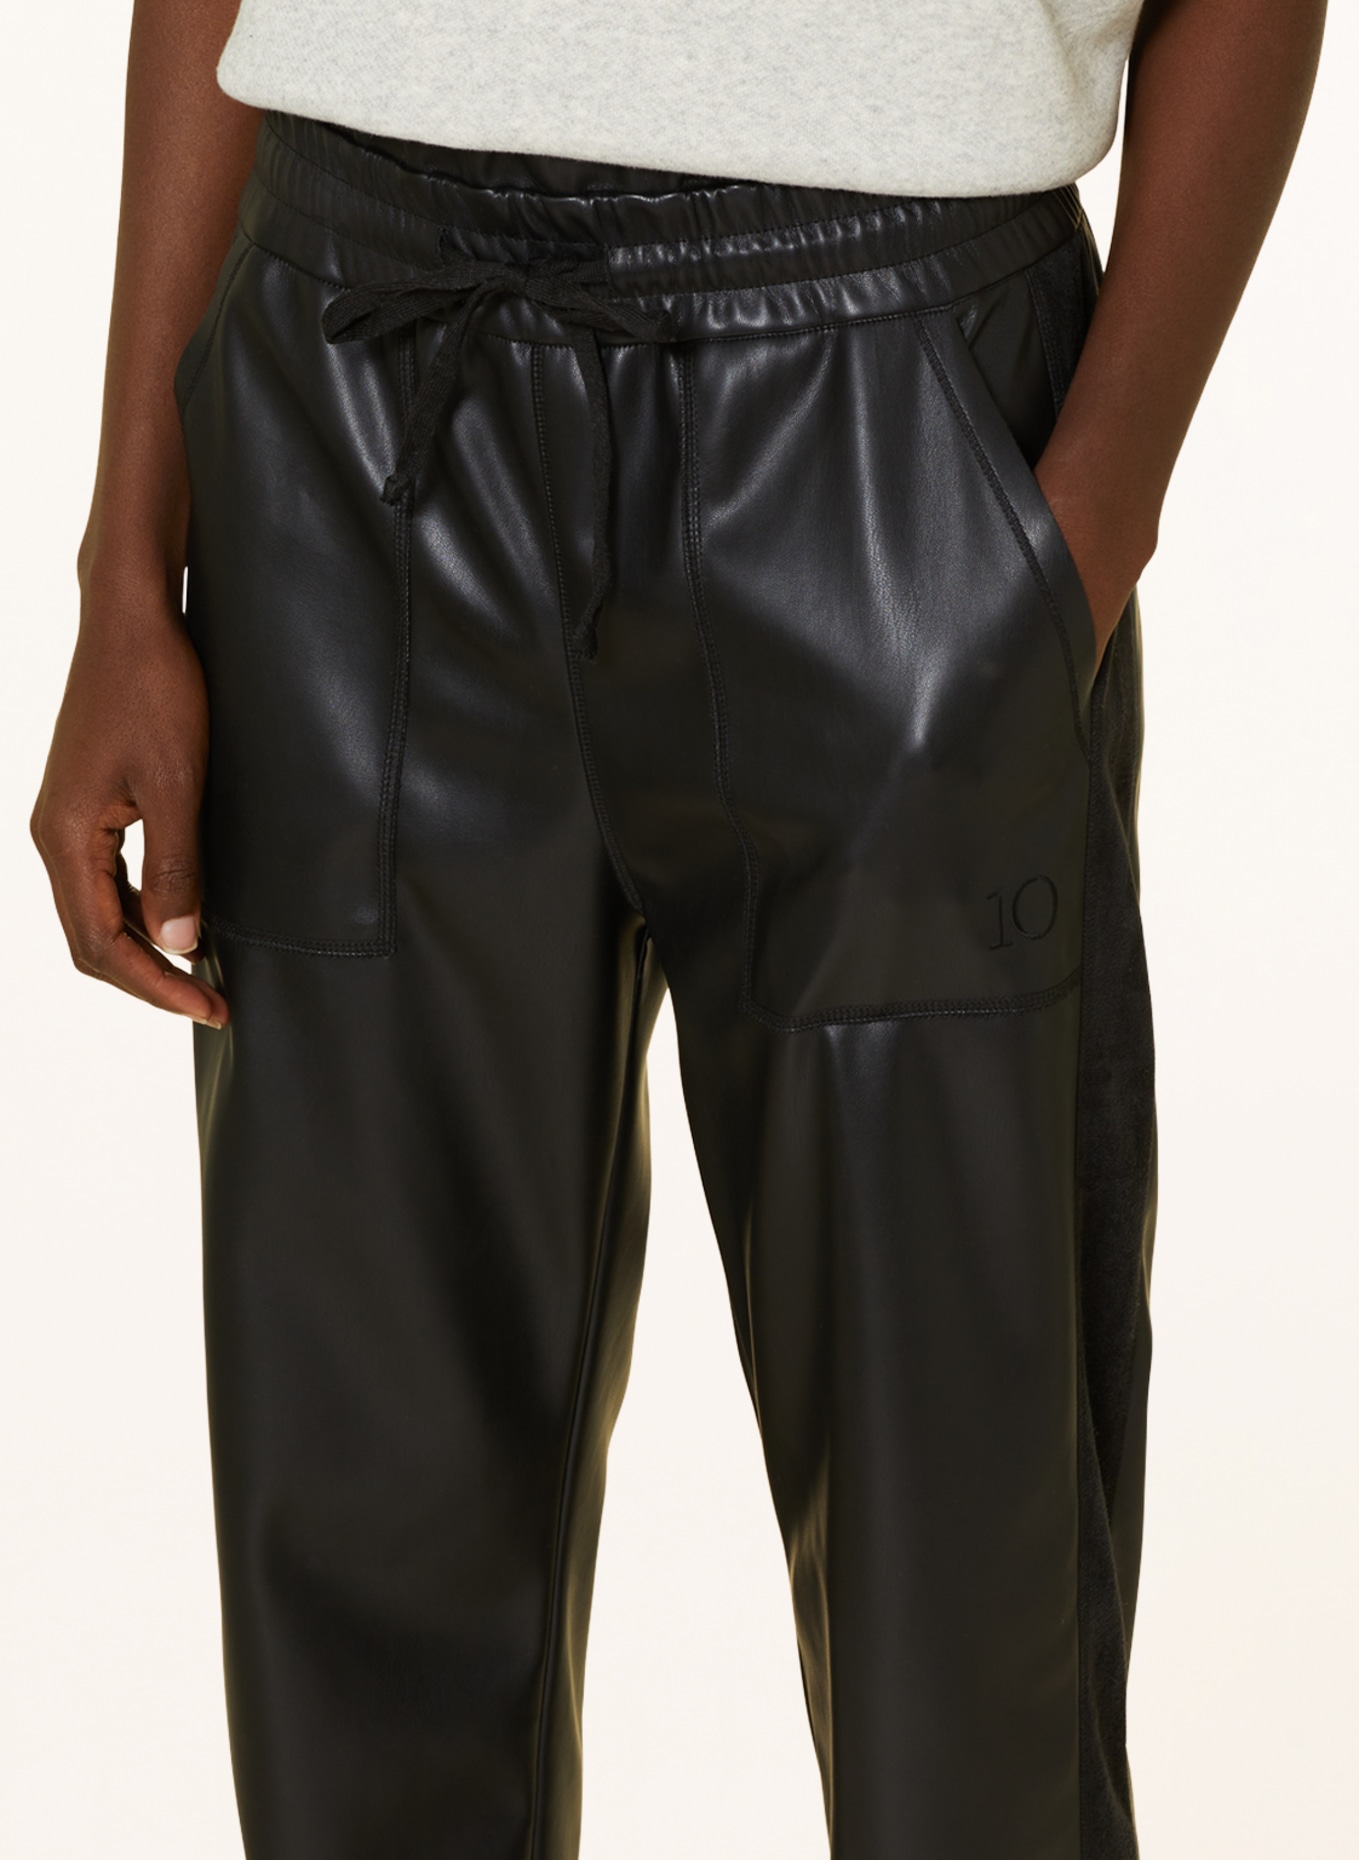 10DAYS Pants in jogger style in leather look, Color: BLACK (Image 5)